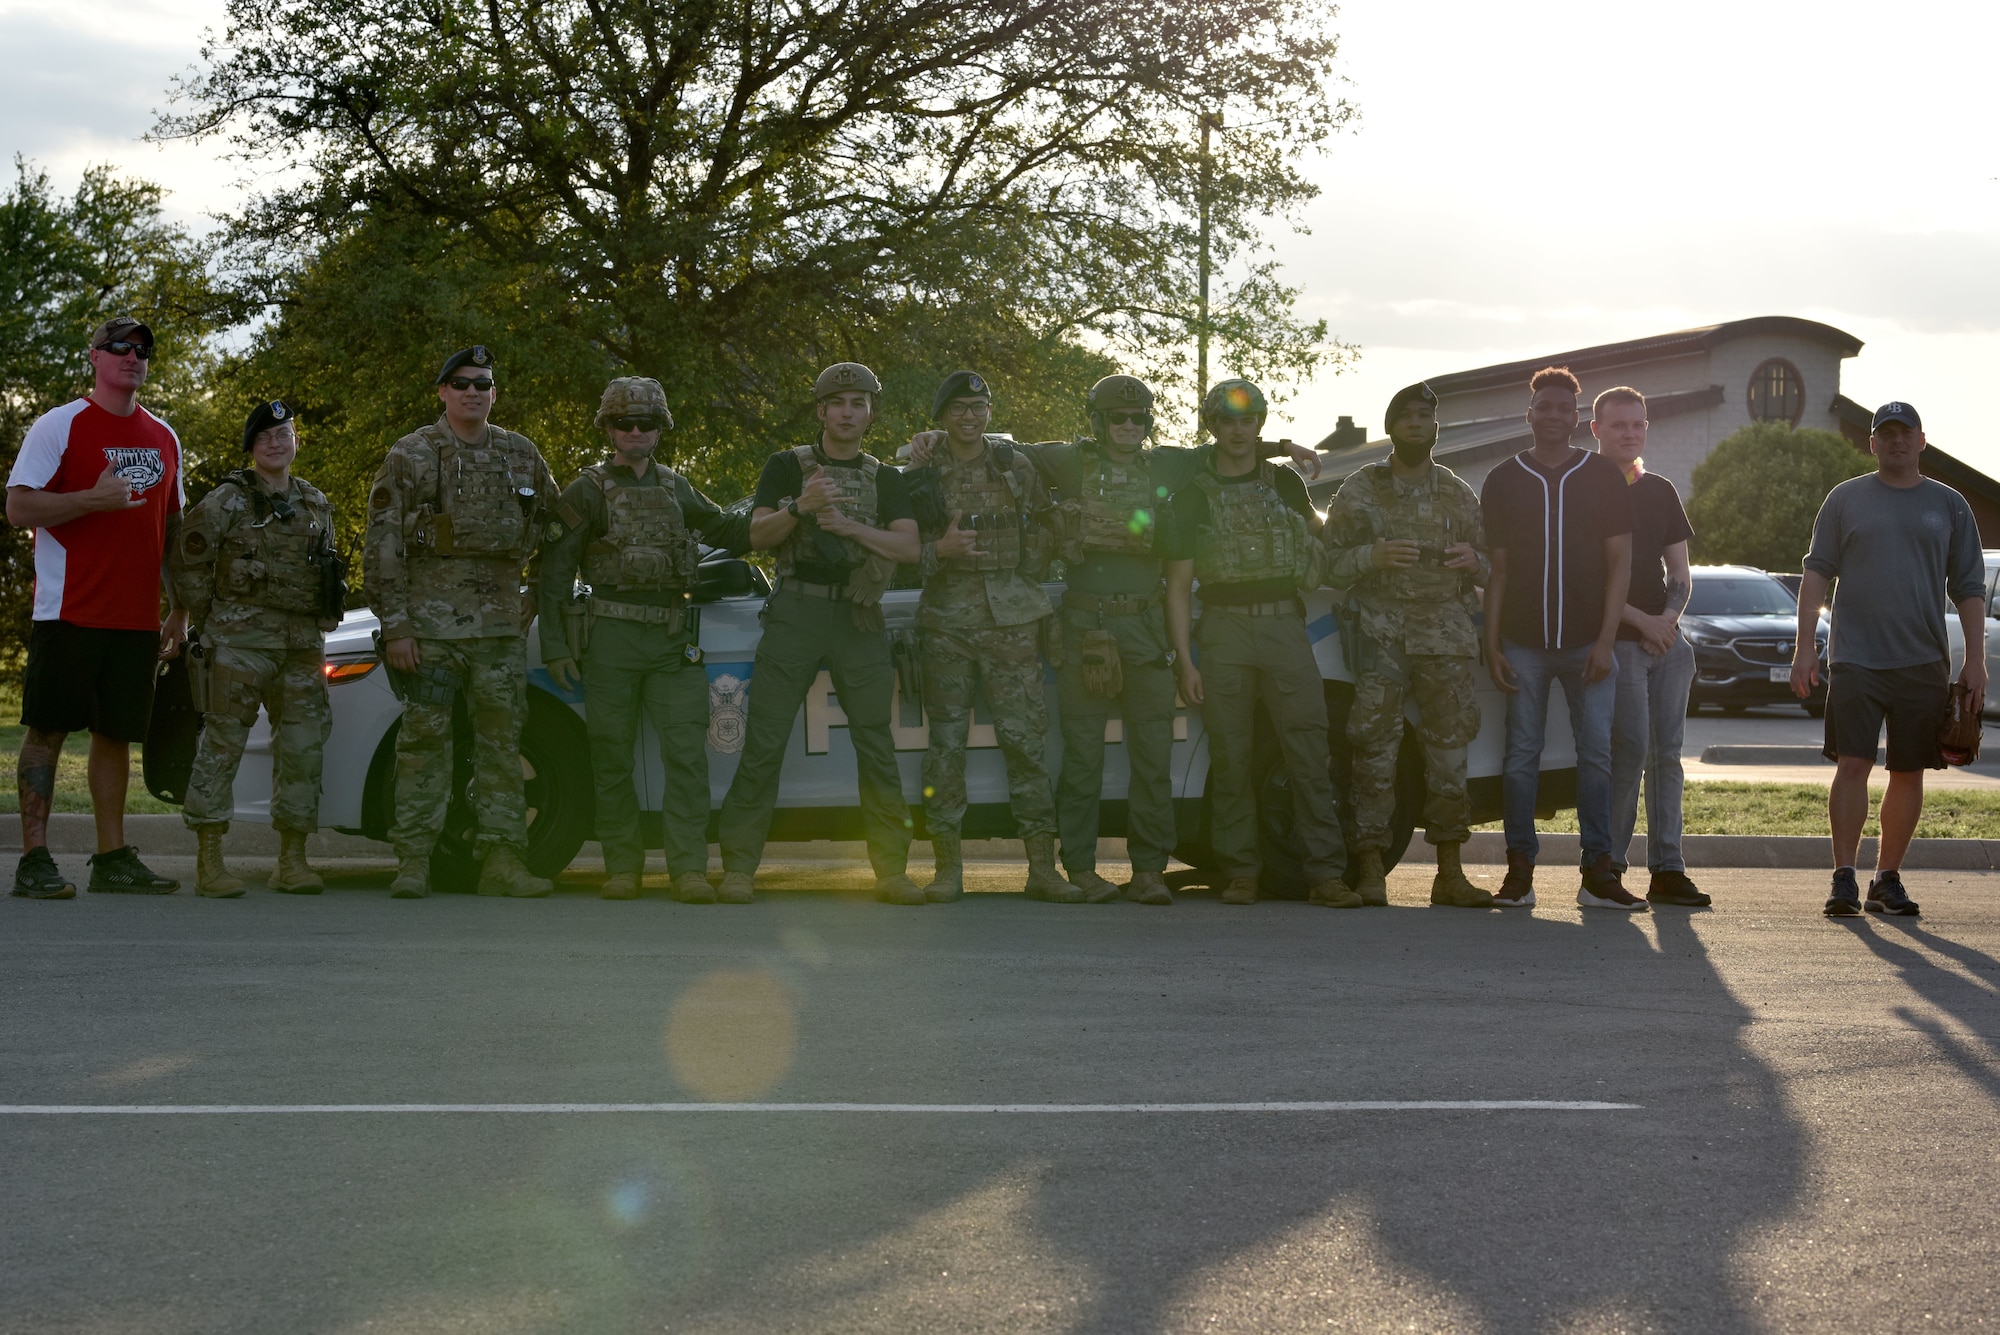 Group of Airmen standing in front of a police car.